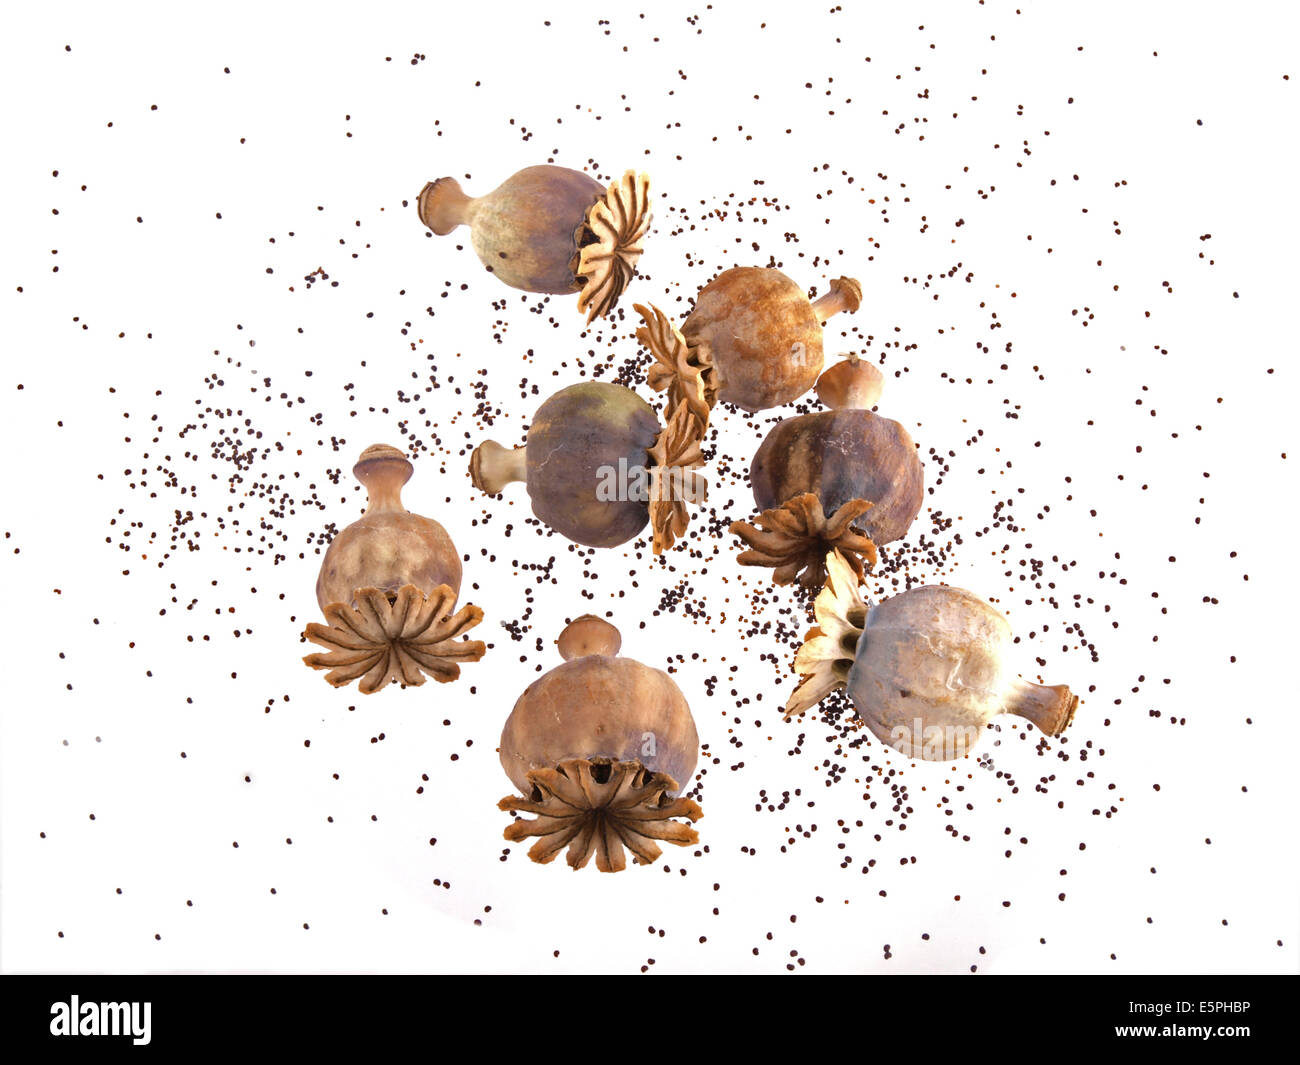 Poppy head and seeds on a white background. Stock Photo